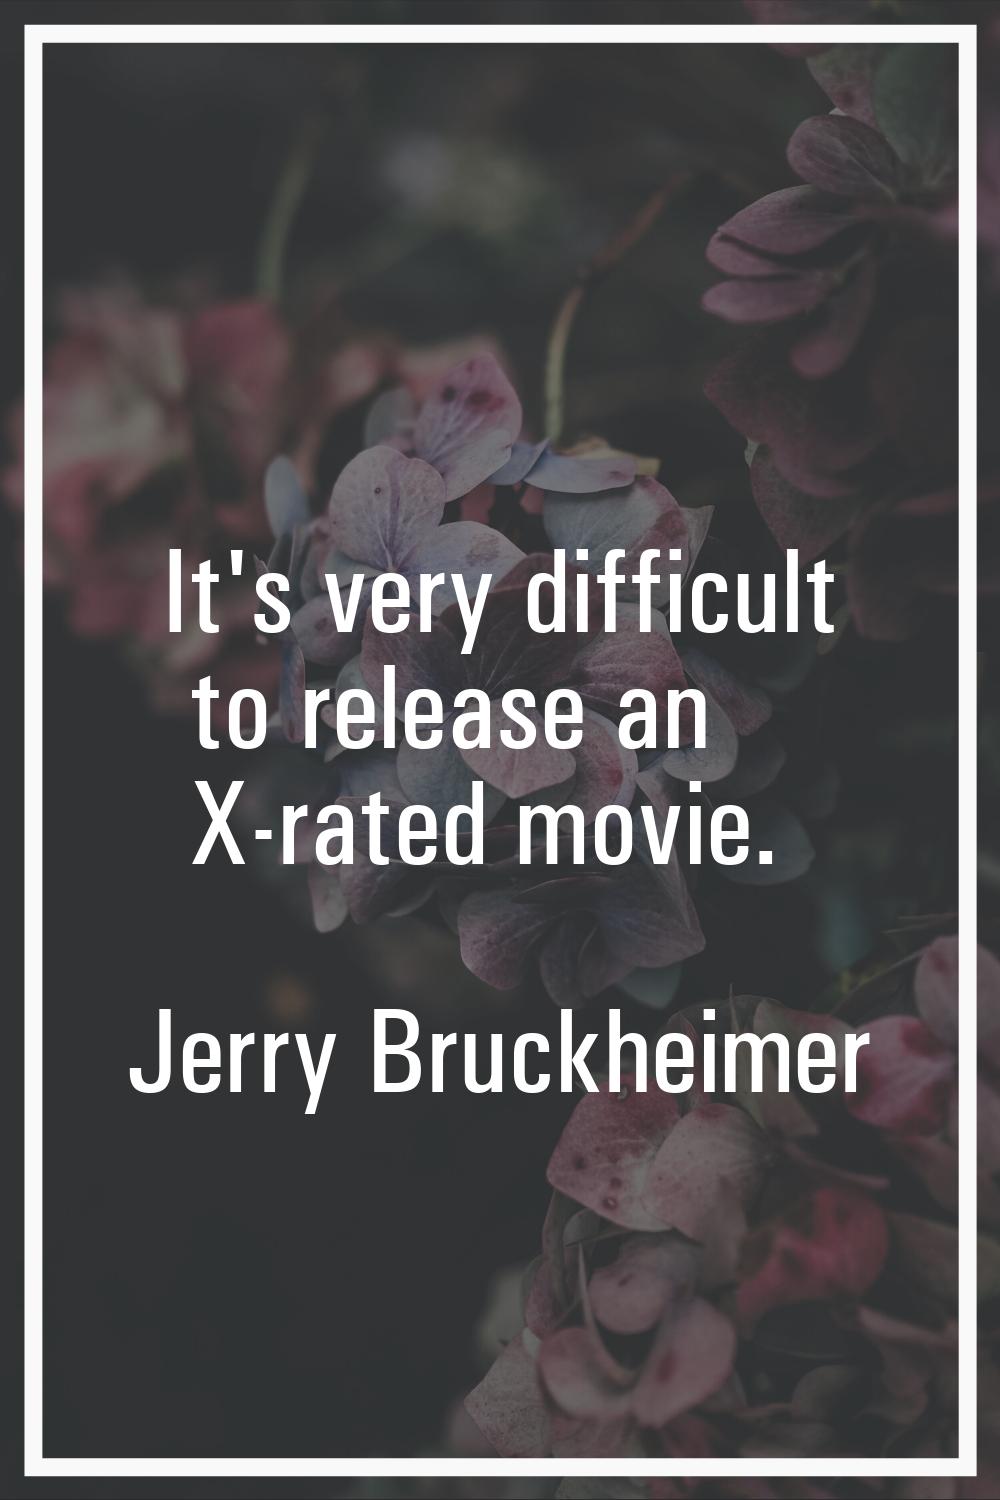 It's very difficult to release an X-rated movie.